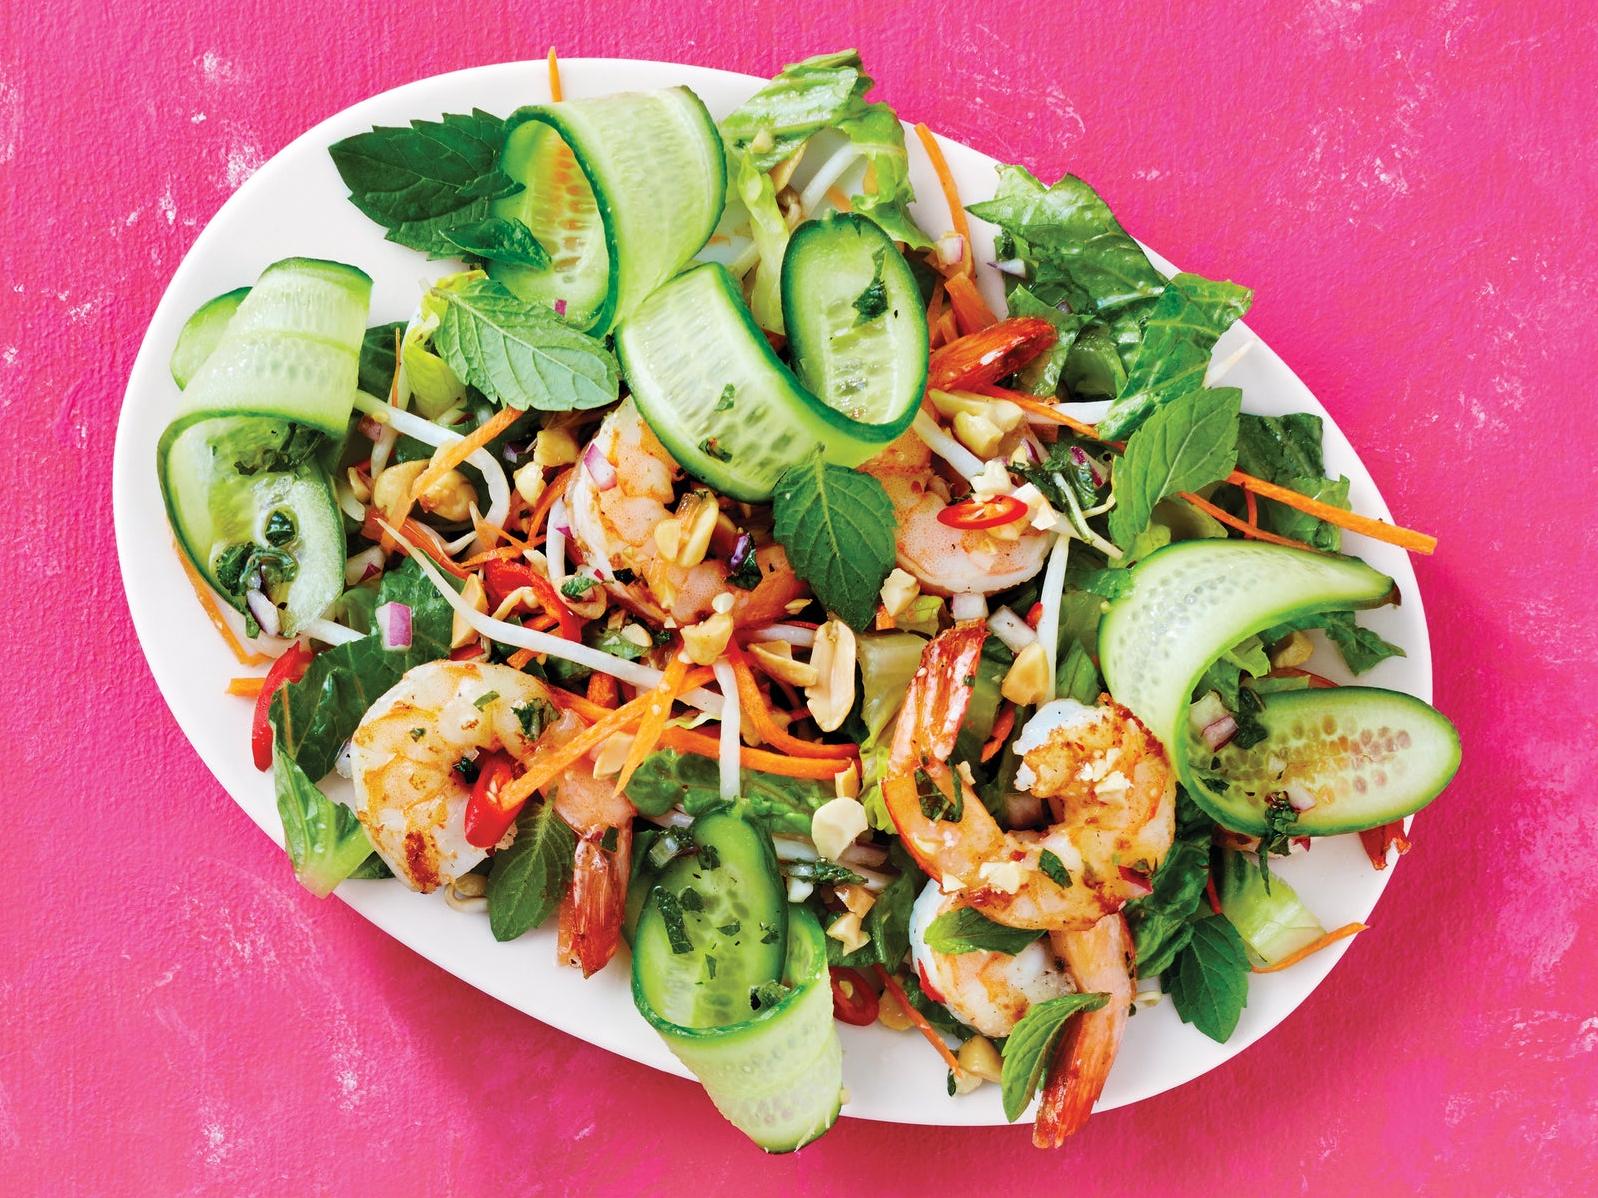  Take your taste buds on a journey to Vietnam with this delicious salad